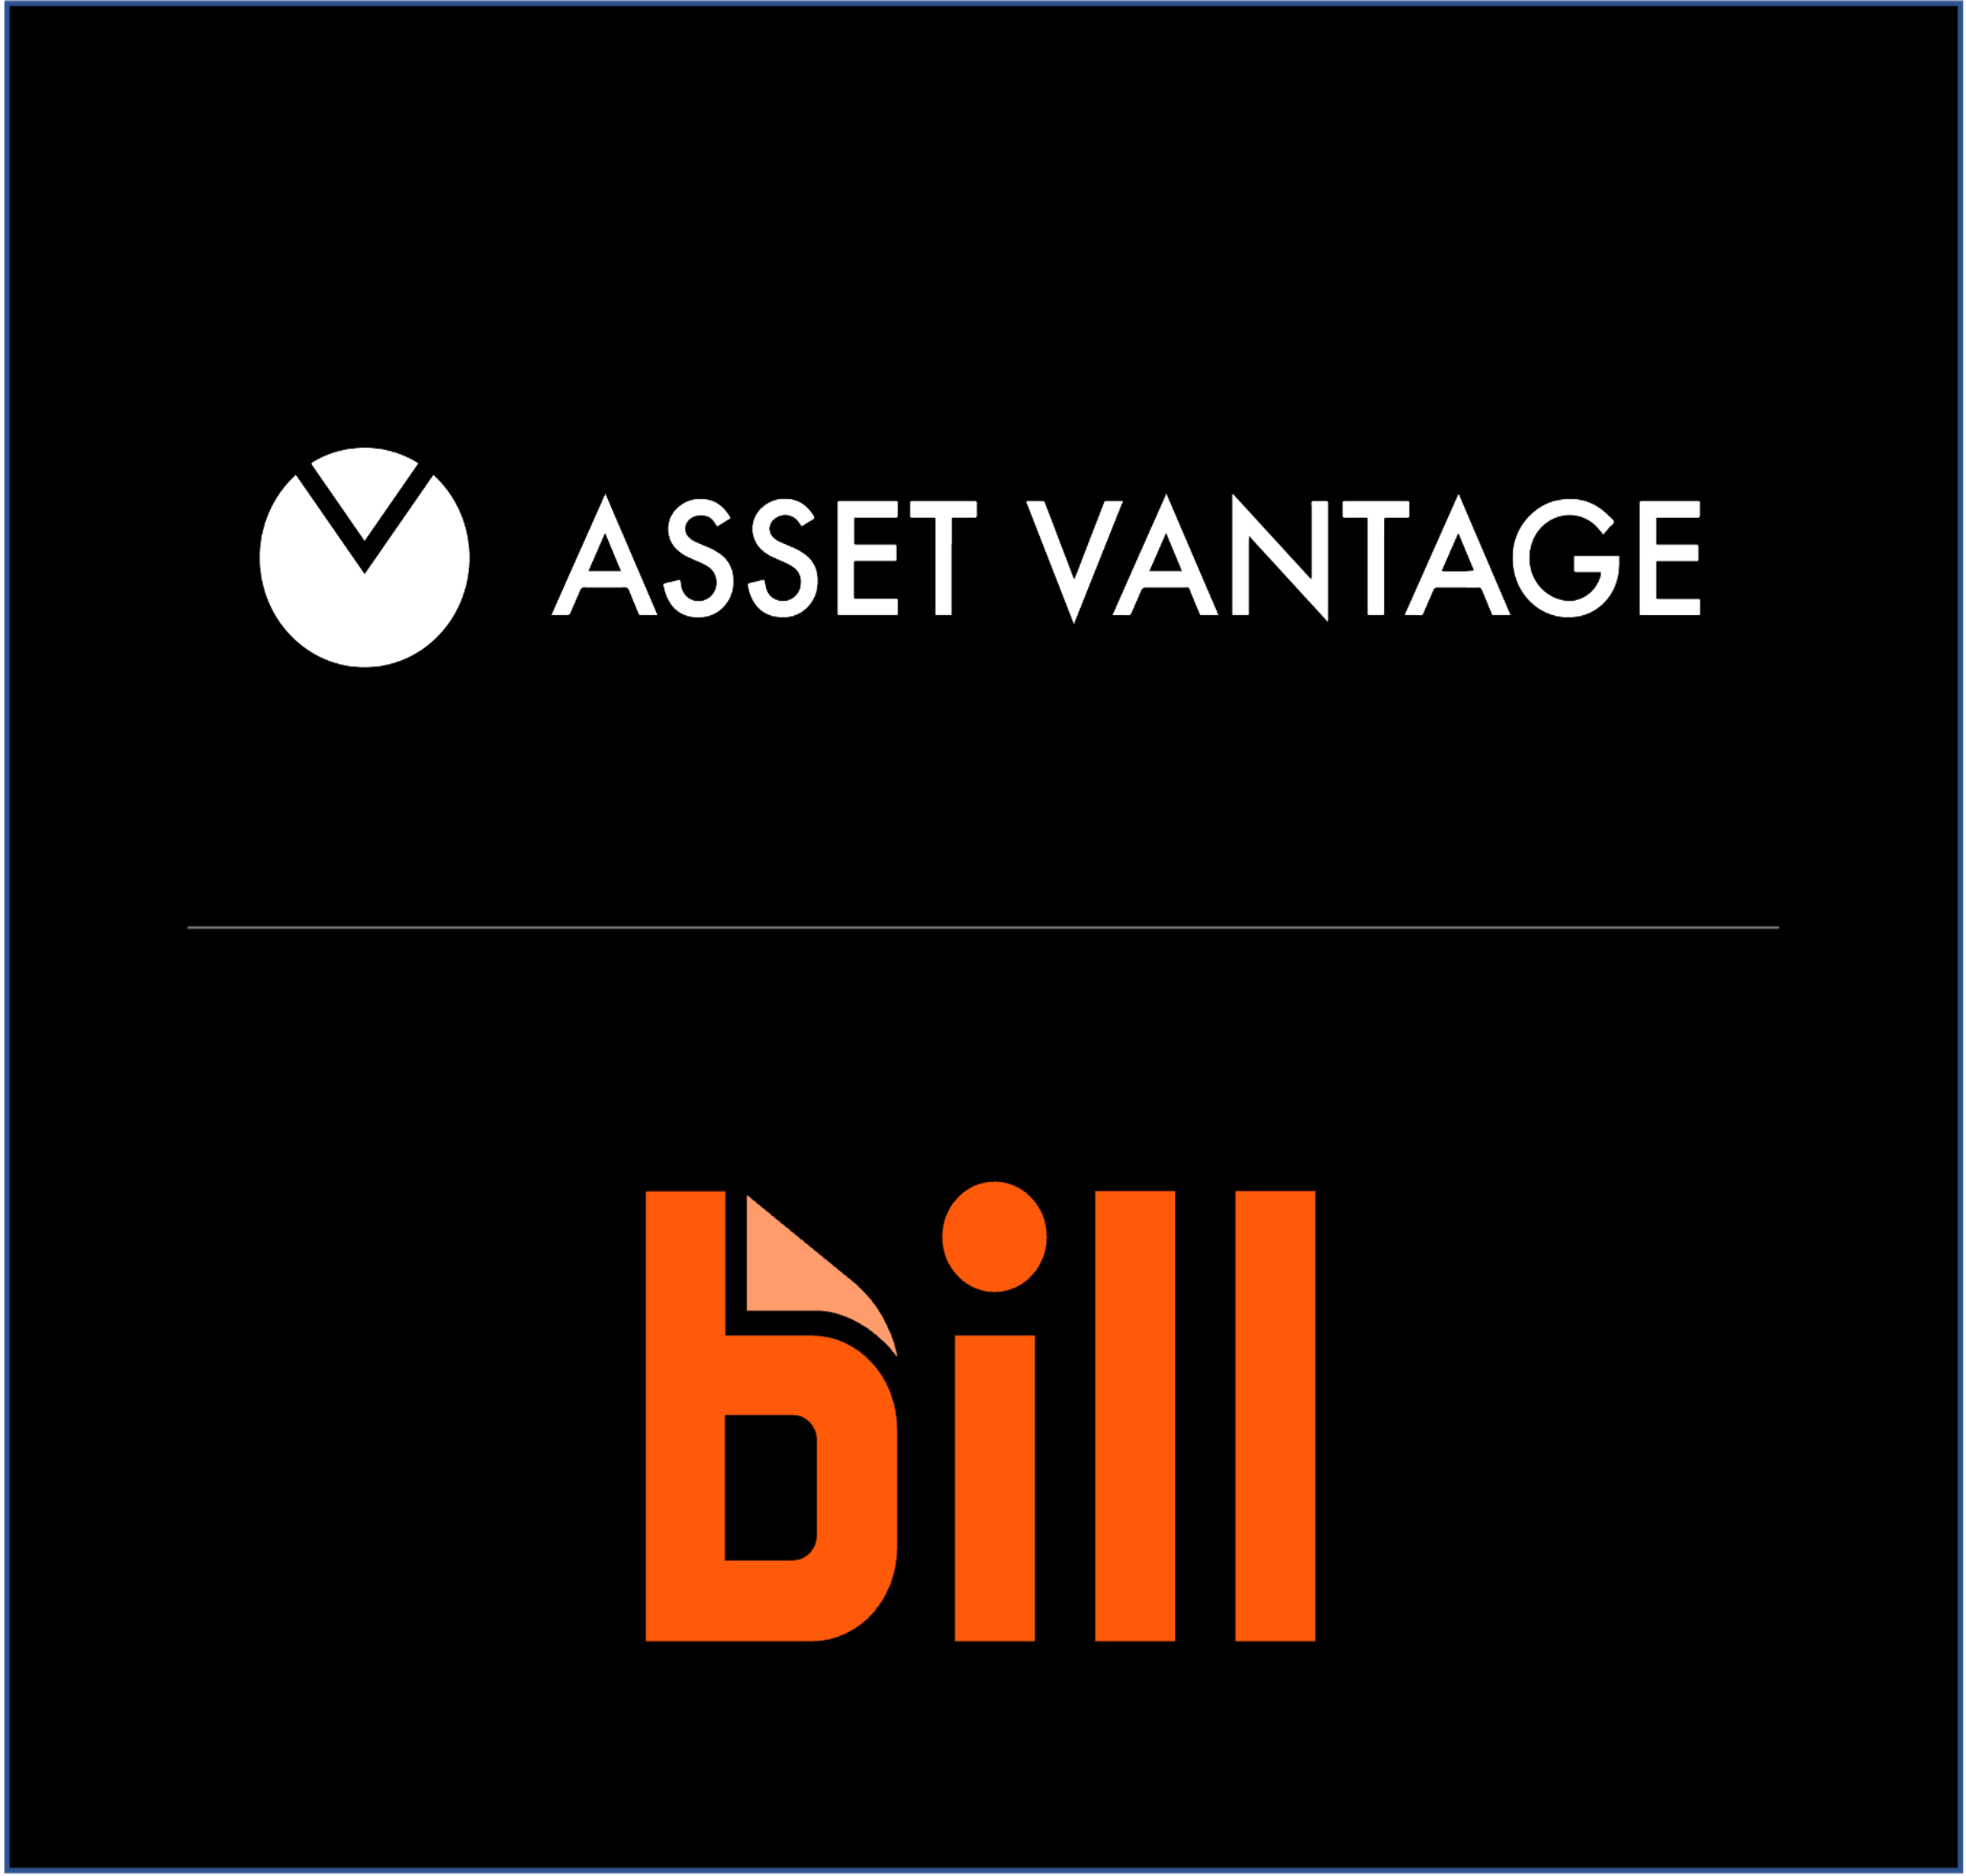 AV integrates with BILL to offer seamless automation of accounts payable